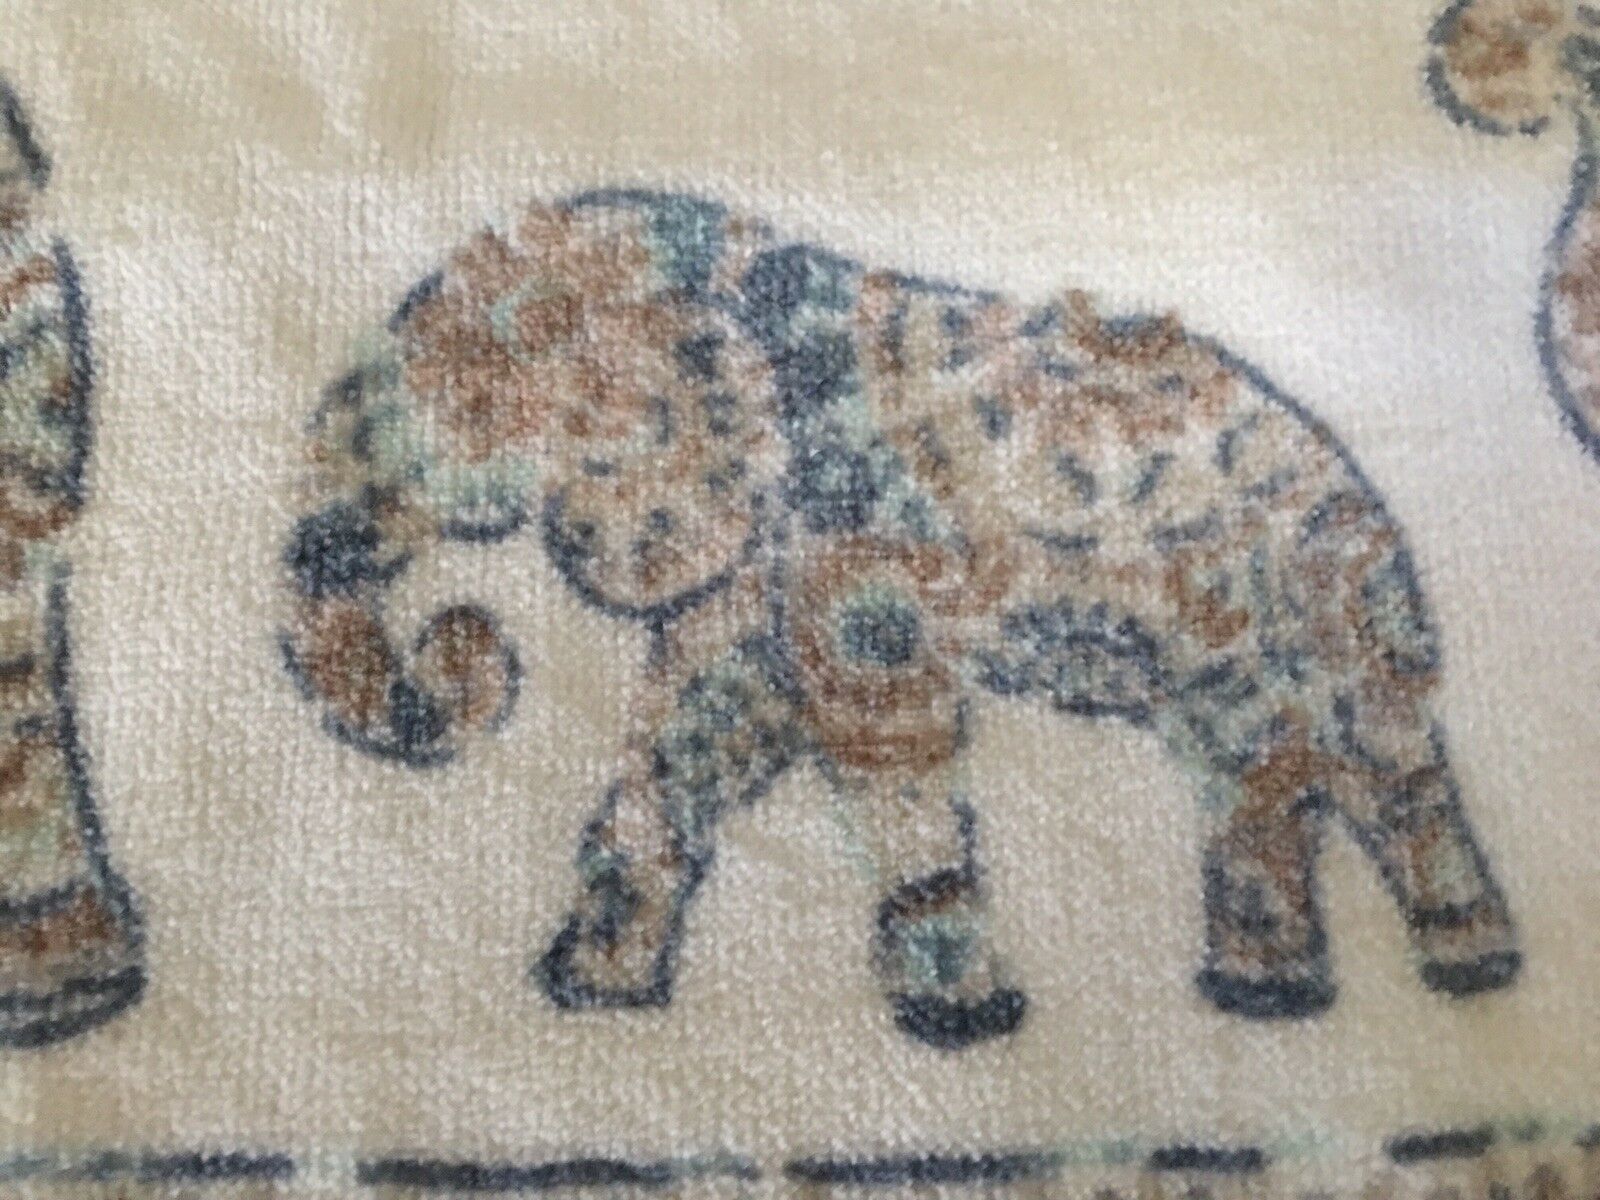 Primary image for ARTISAN de LUXE HOME  ELEPHANT 2pc HAND WHITE/NAVY/TAN NWT